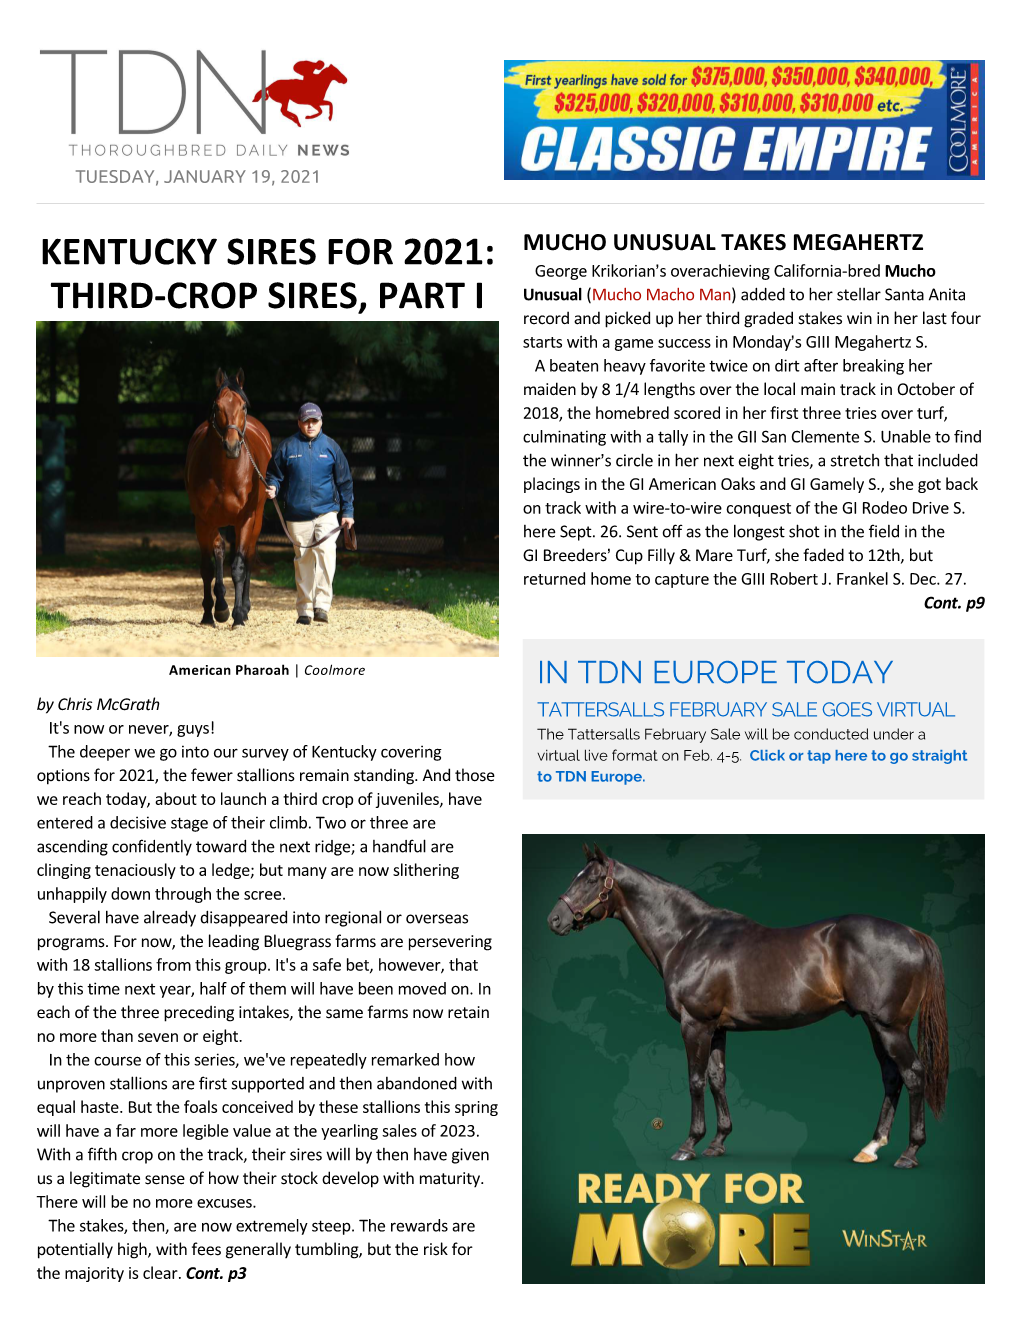 Kentucky Sires for 2021: Third-Crop Sires, Part I